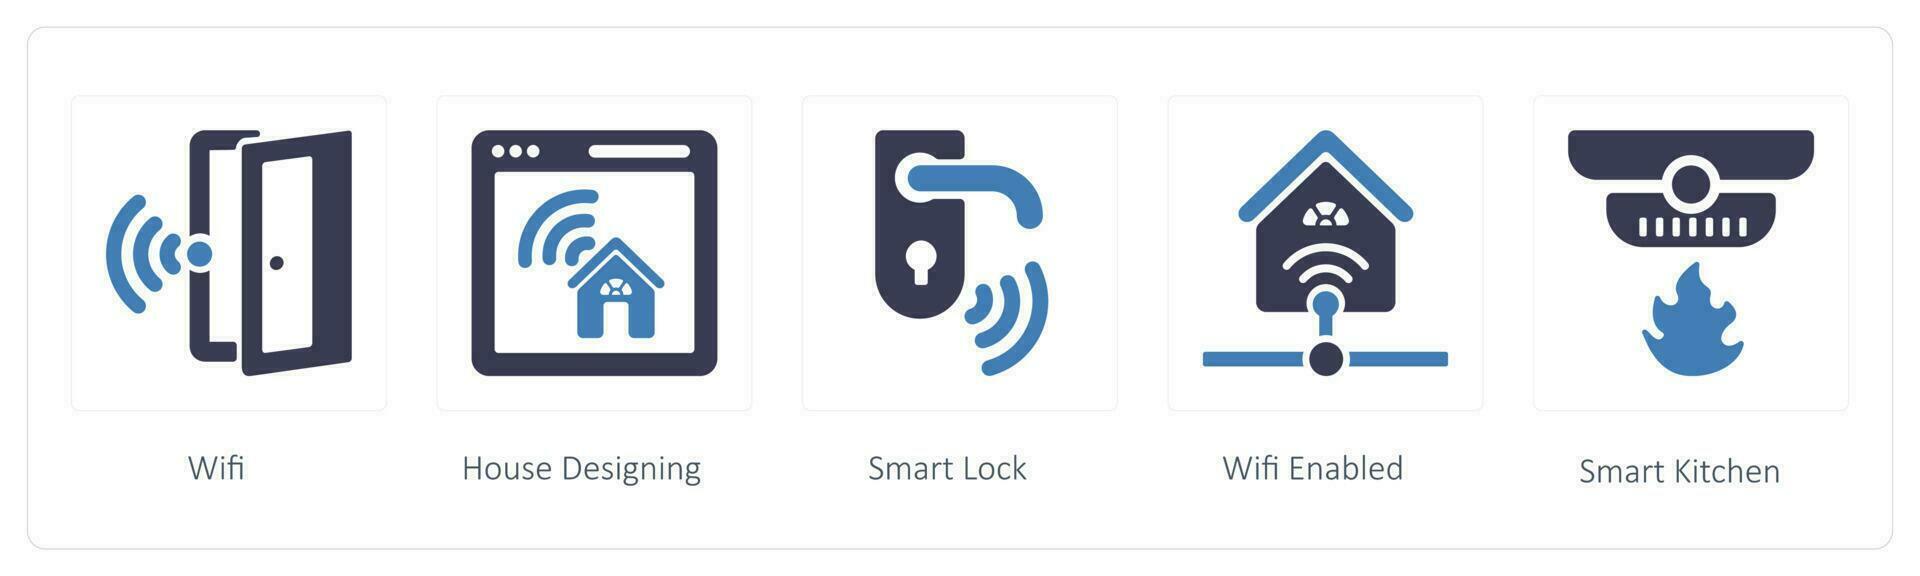 business icons such as wifi, house designing and Smart Lock vector